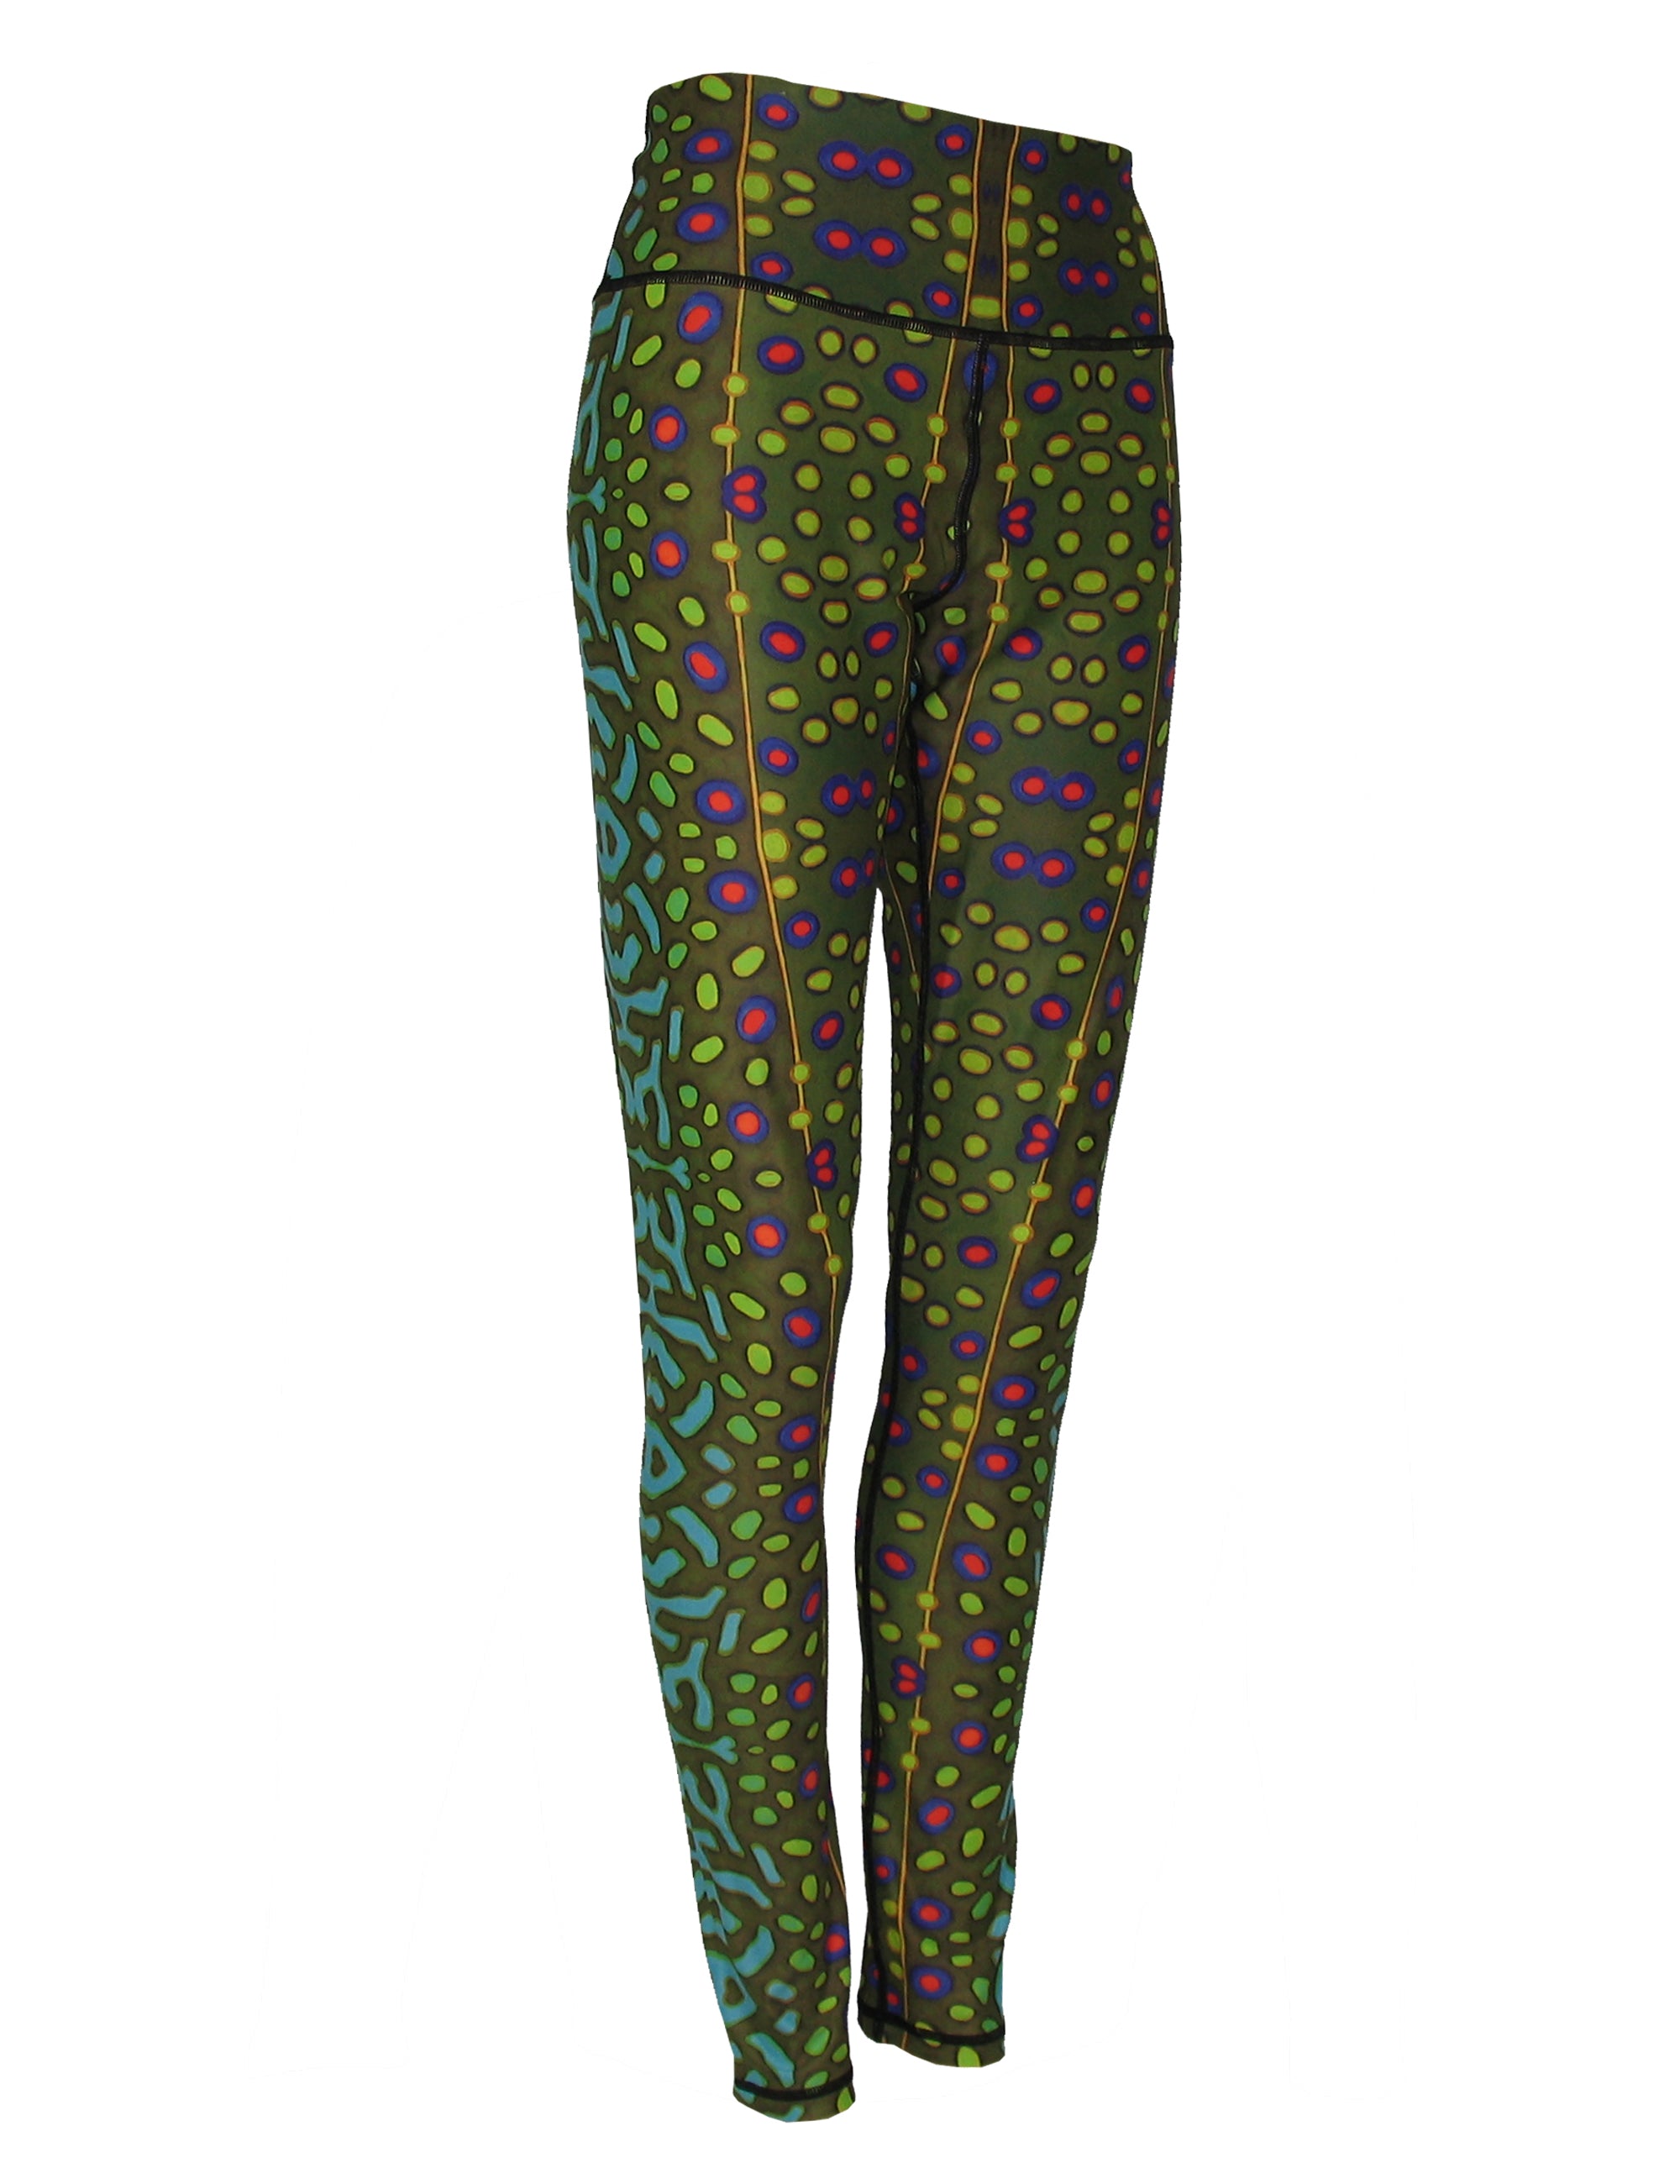 Rainbow Trout Skin, Women Fly Fishing Leggings, Gym, Workout, Fitness, Layering, Fish